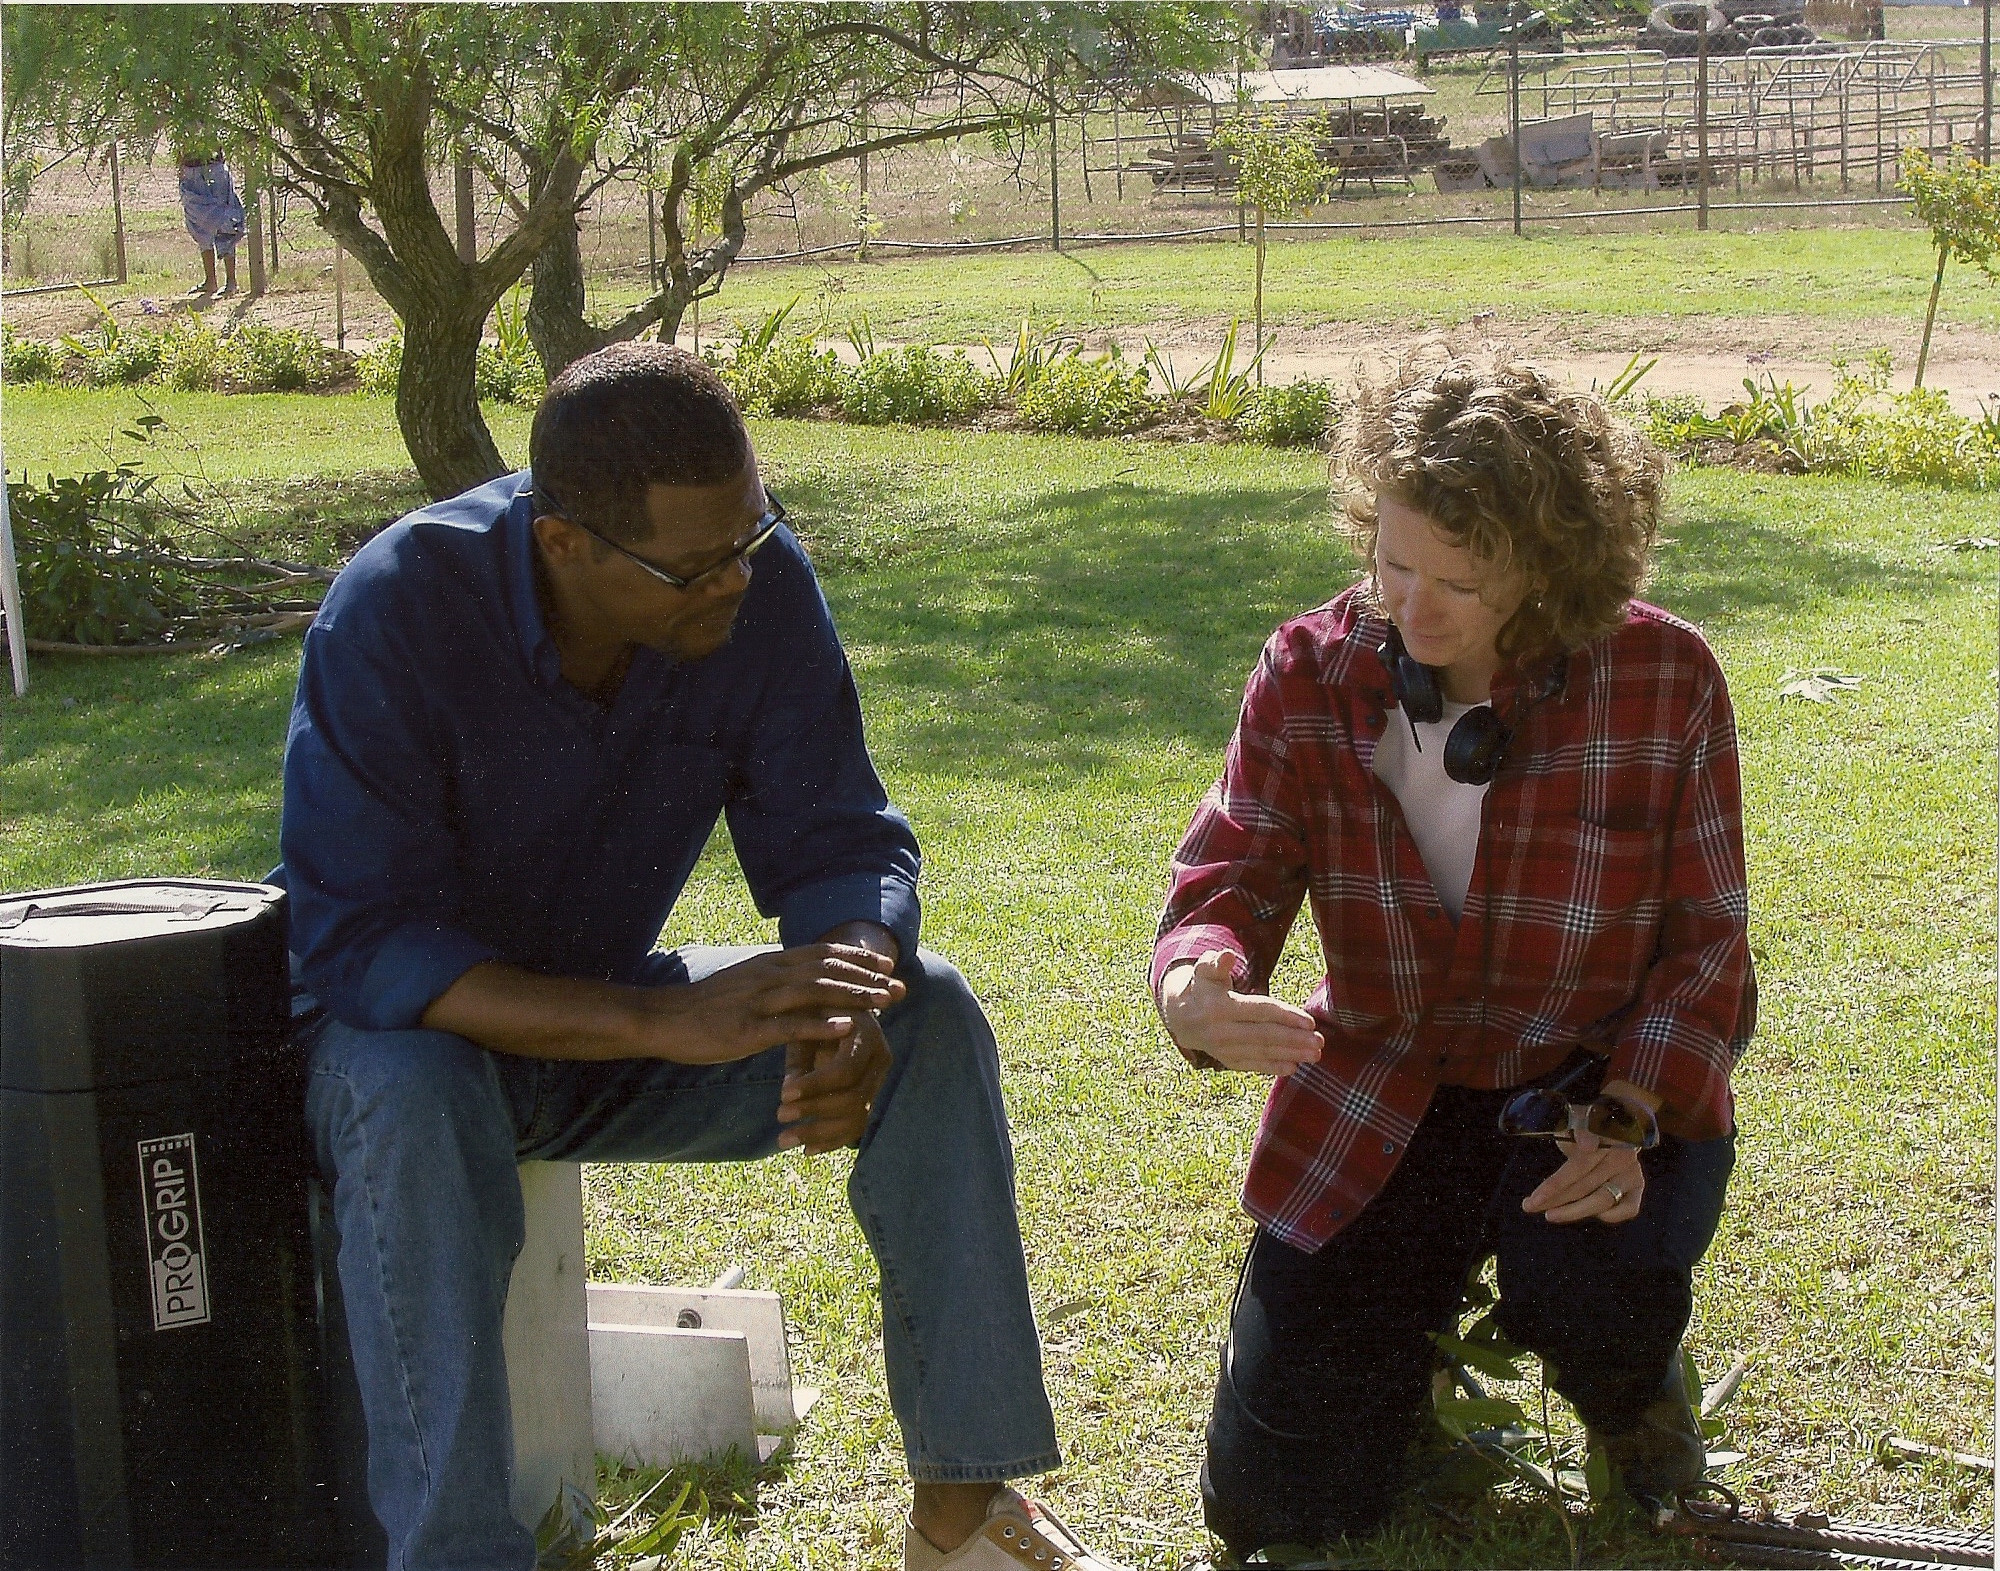 Samuel L. Jackson and Lynn Hendee on location for 'In My Country' in South Africa